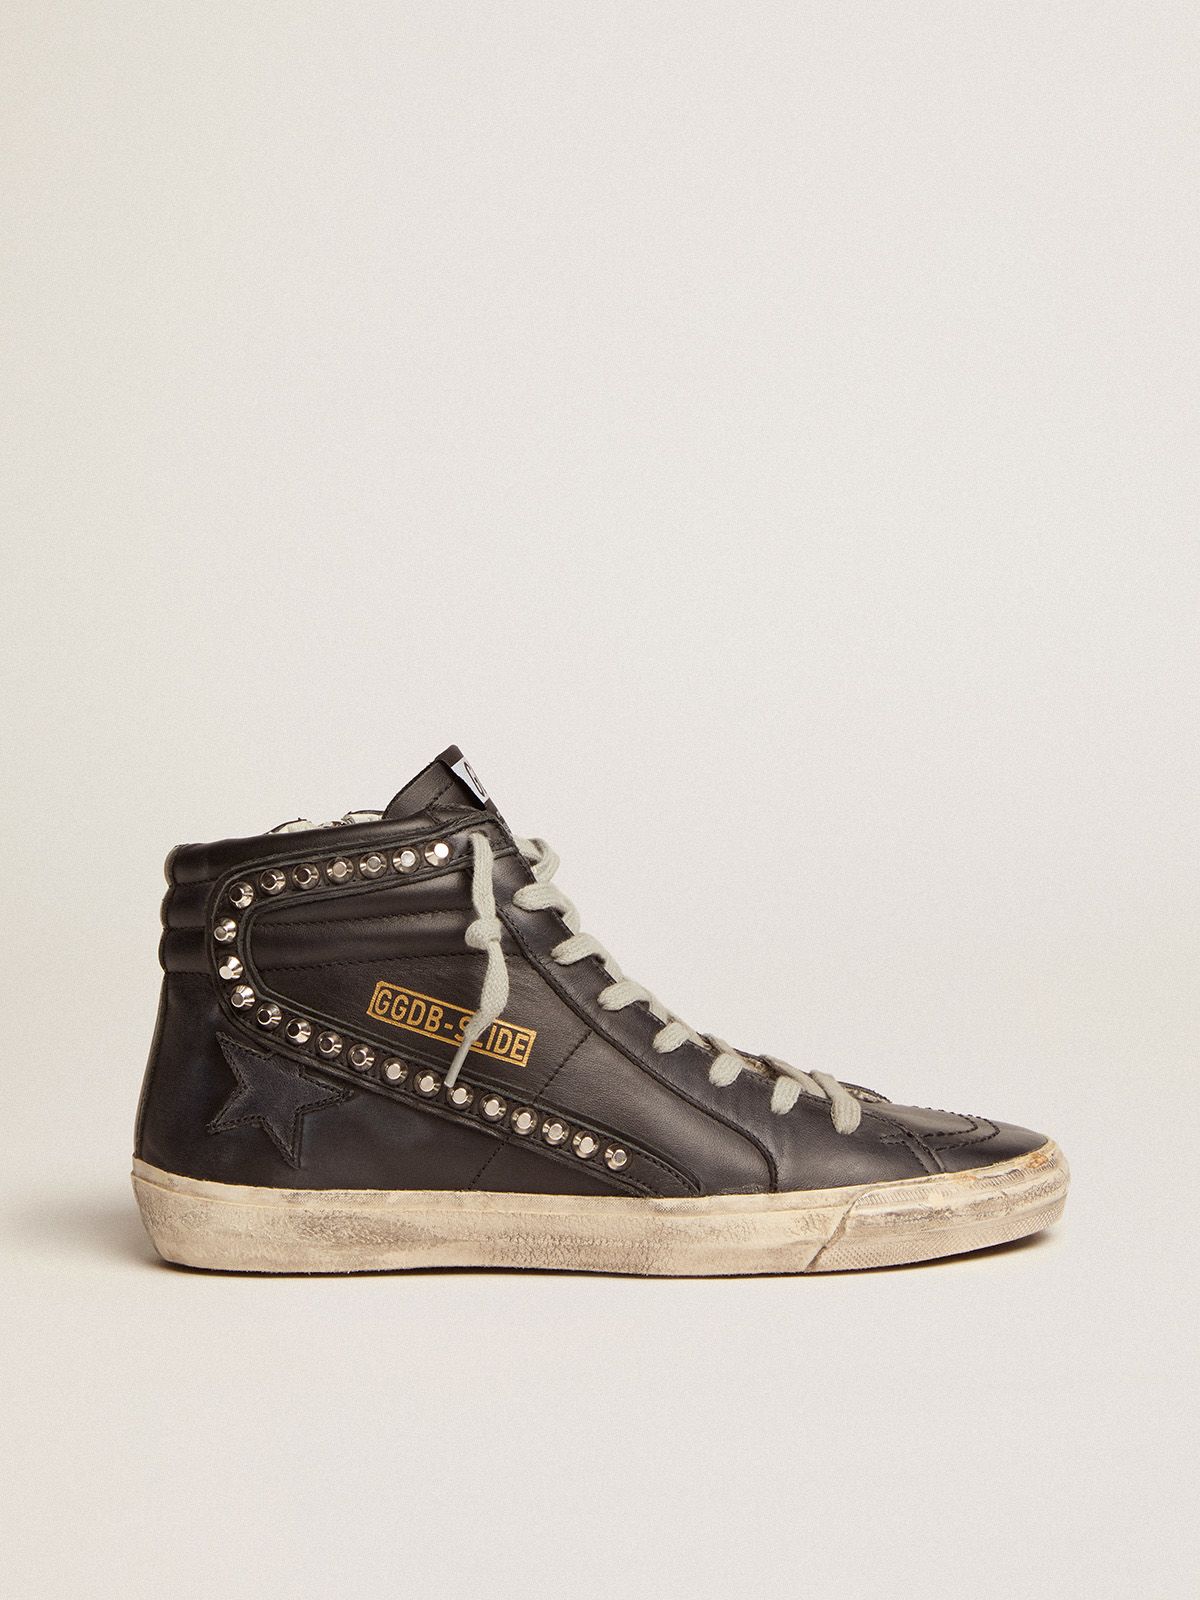 golden goose Slide in sneakers leather studded metal